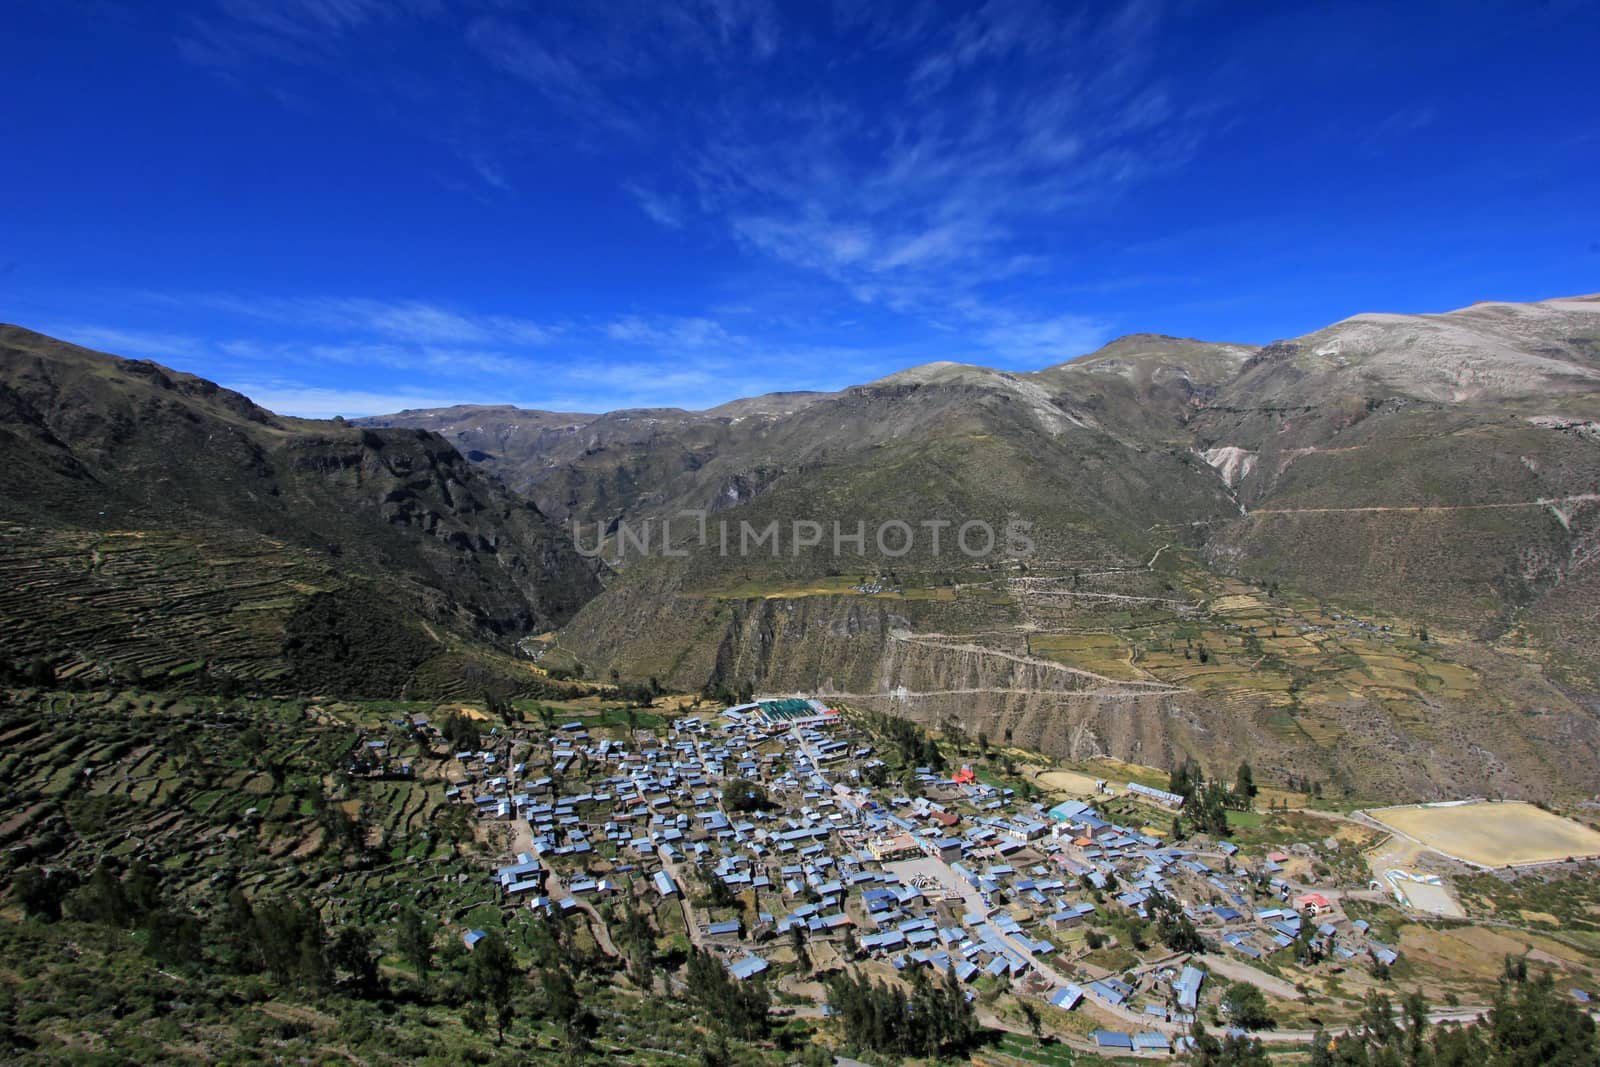 Overview to the nice mountain village Puica at the edge of the very deep Cotahuasi canyon, Peru